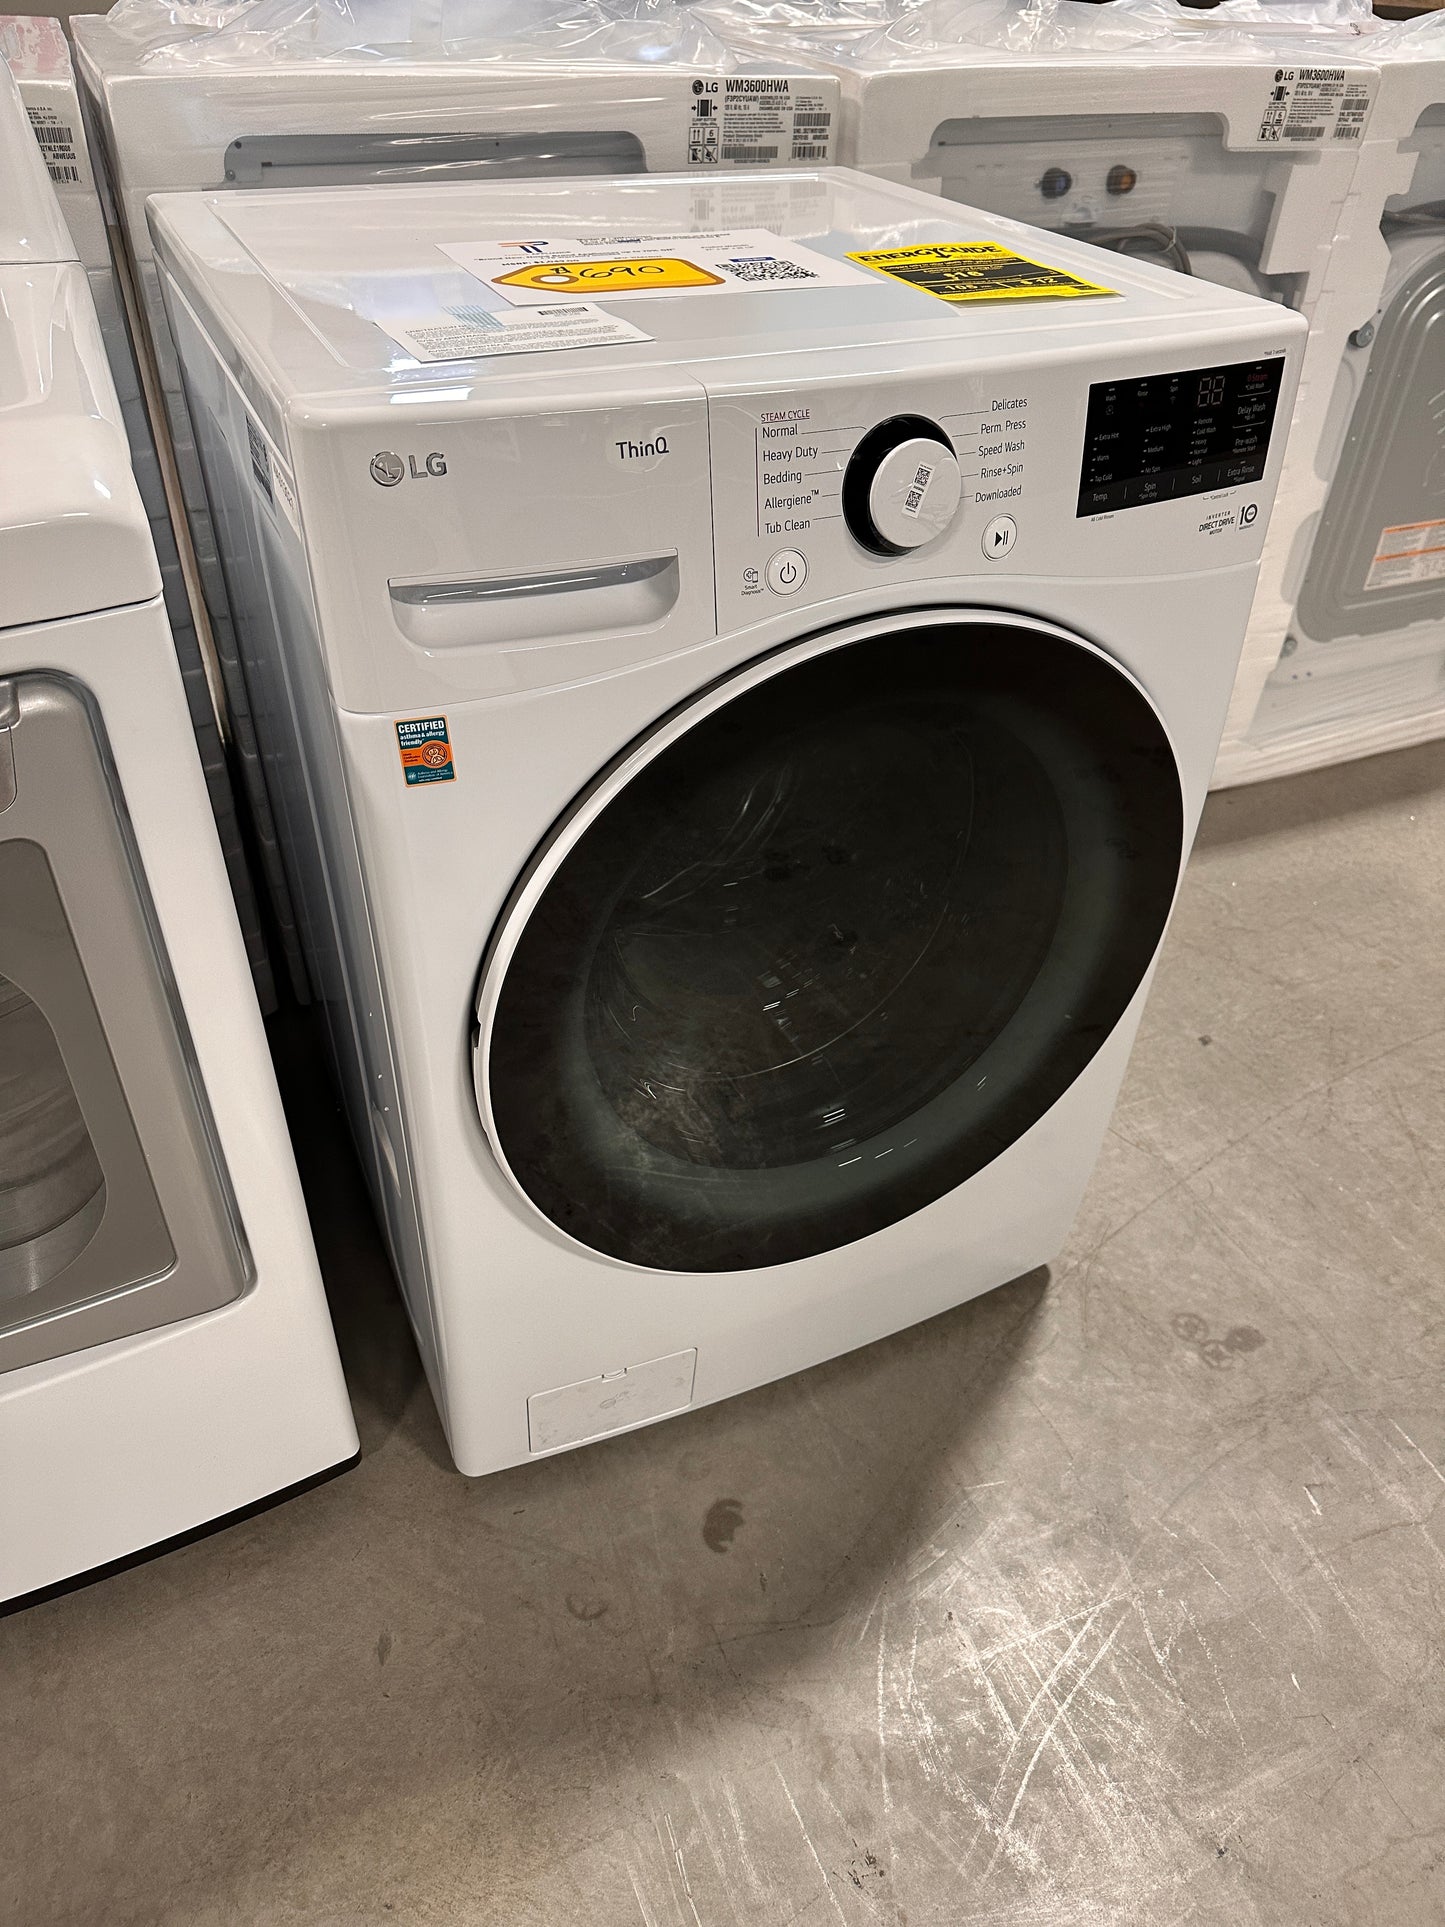 NEW LG FRONT LOAD WASHER WITH STEAM - WAS13019 WM3600HWA